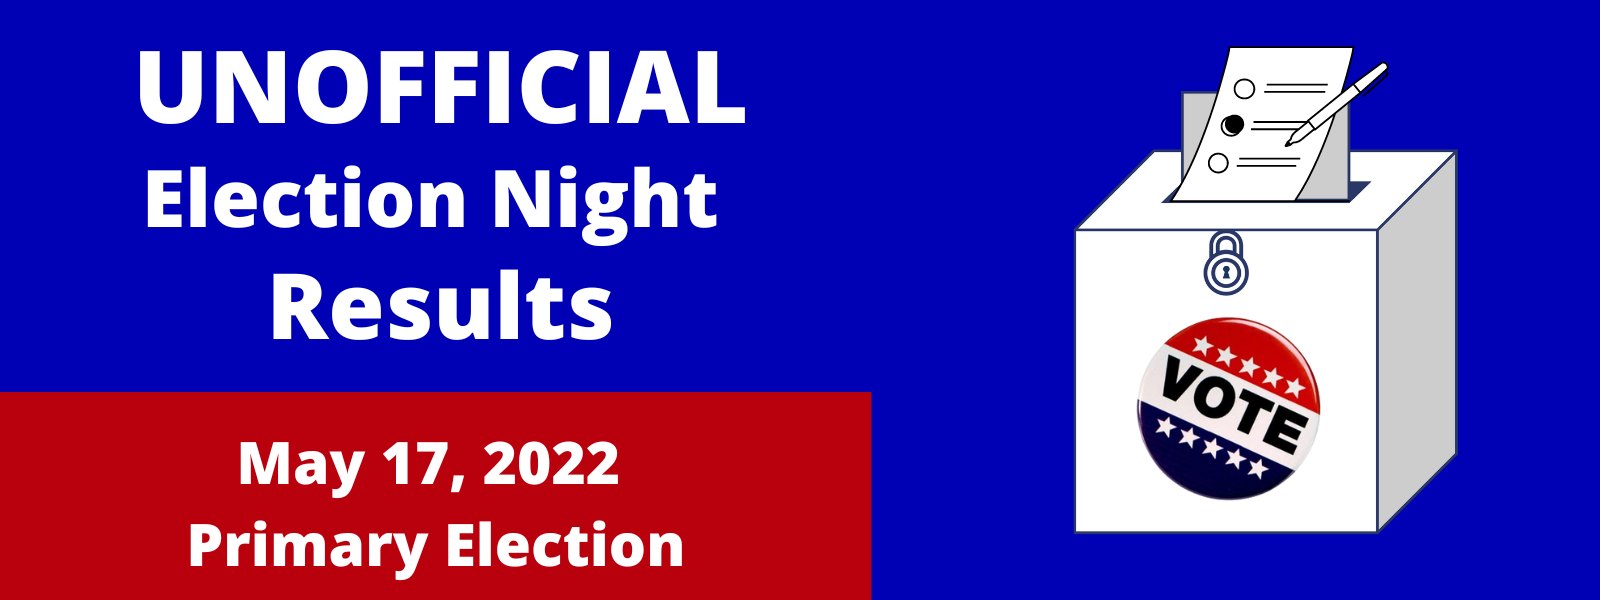 Unofficial Election Night Results